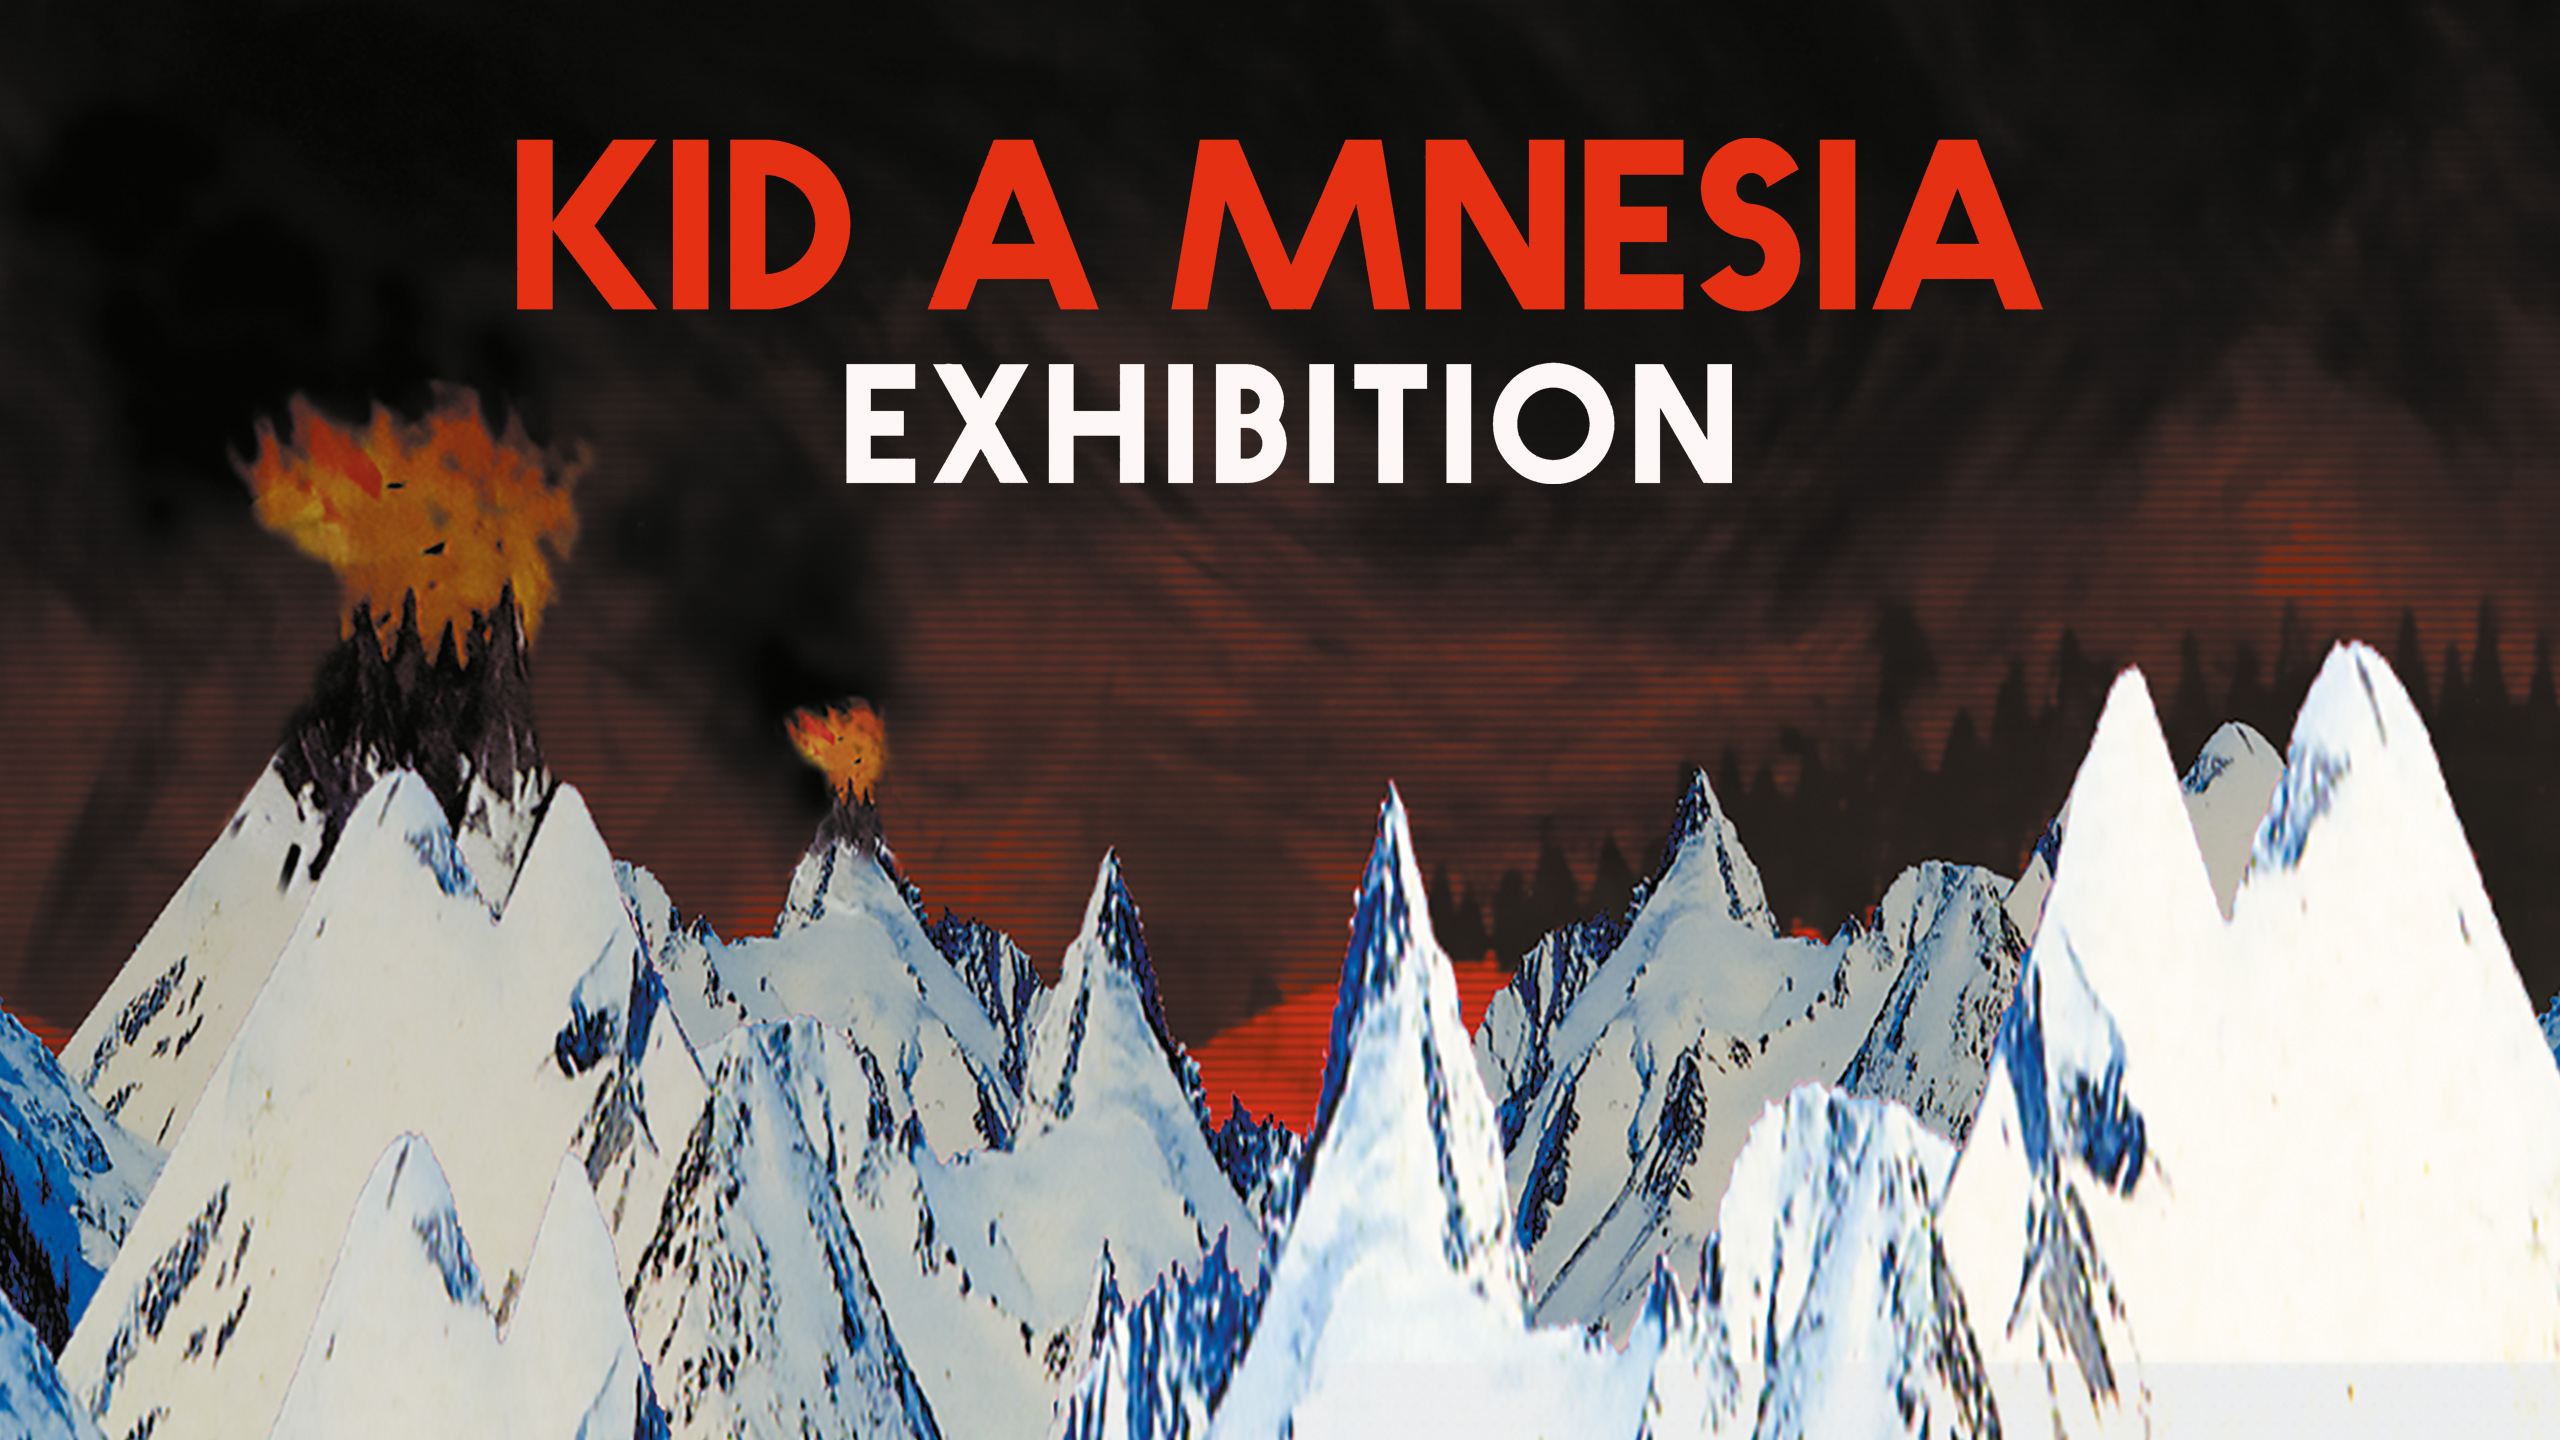 The KID A MNESIA poster, featuring stark white mountains against a dark background